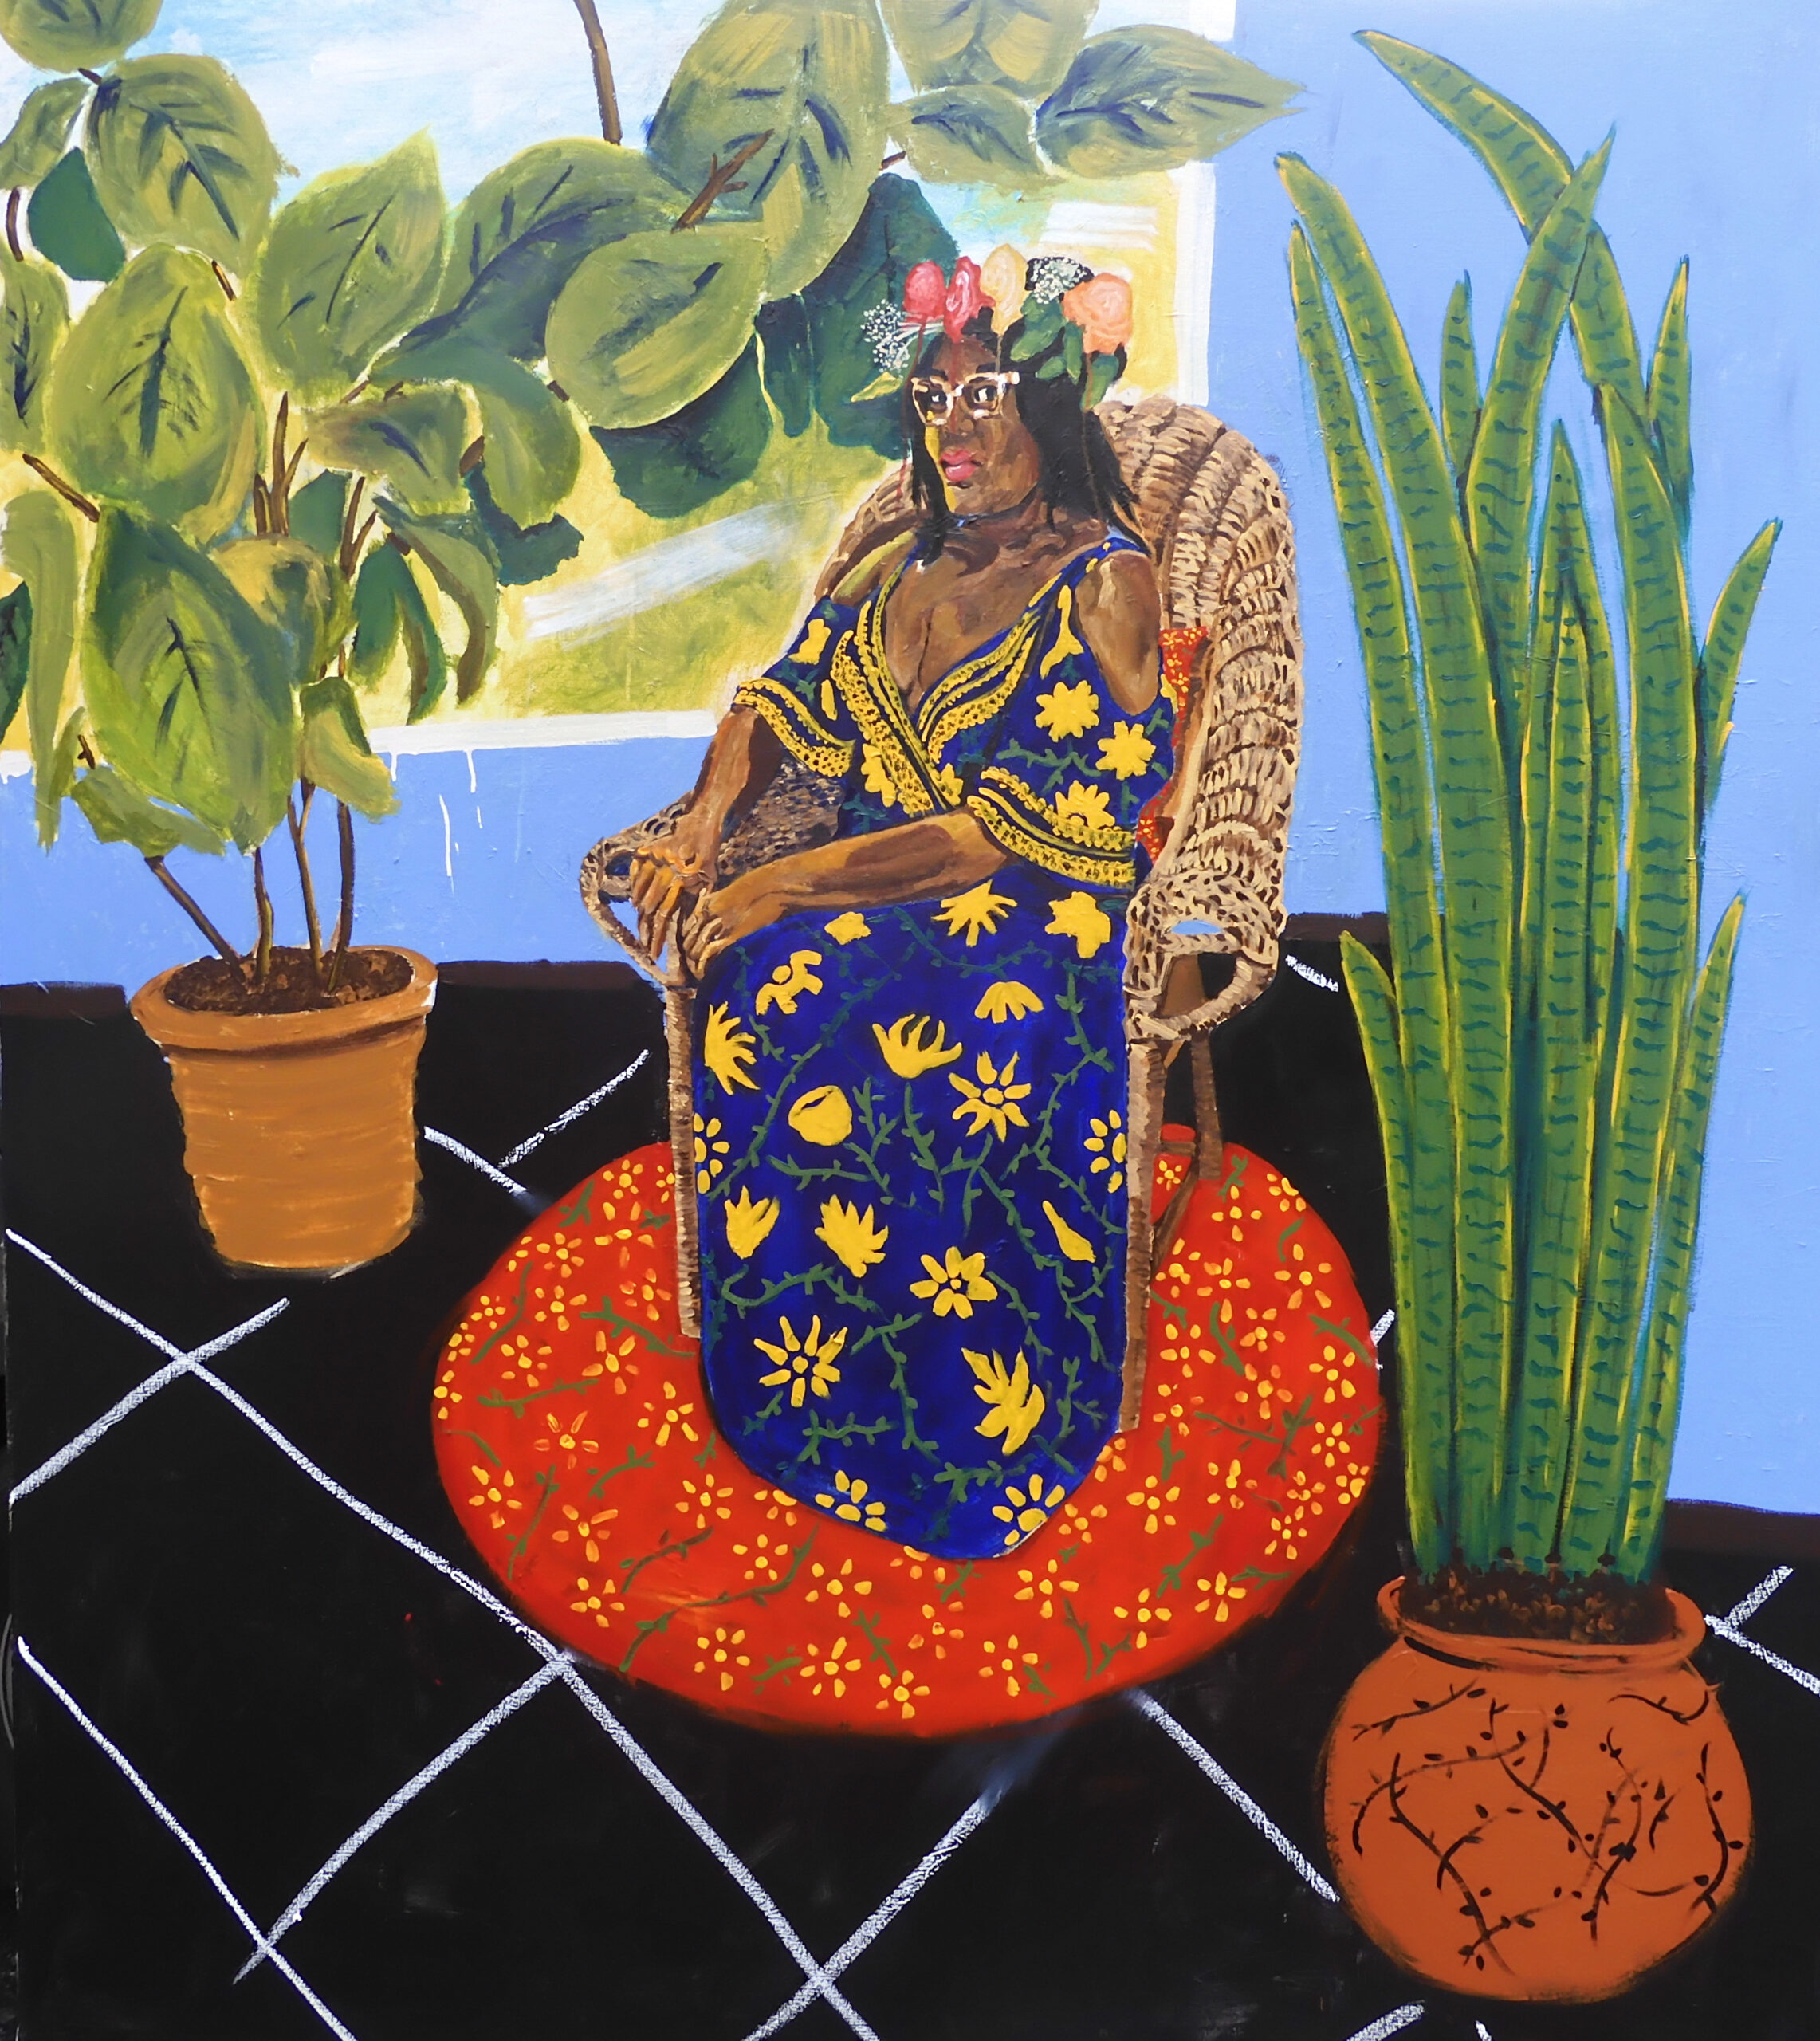 Jerrell Gibbs, Lady in Blue Dress, 2020, Acrylic, Oil stick on canvas, 80 1/4 x 70 1/4 inches, Courtesy the artist and Mariane Ibrahim, Chicago, IL